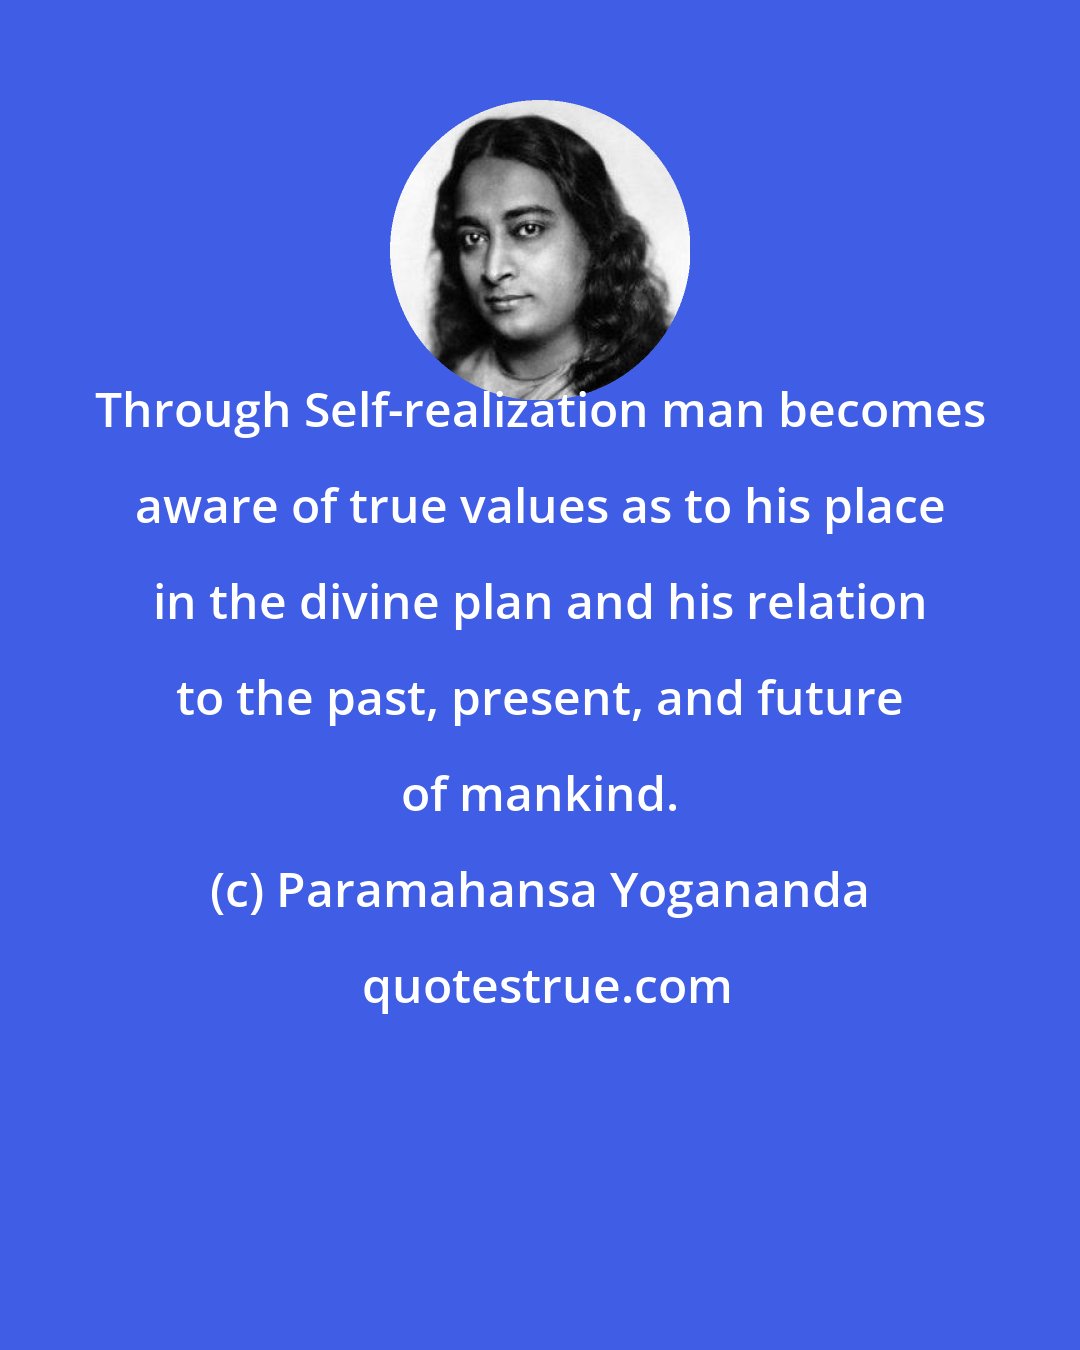 Paramahansa Yogananda: Through Self-realization man becomes aware of true values as to his place in the divine plan and his relation to the past, present, and future of mankind.